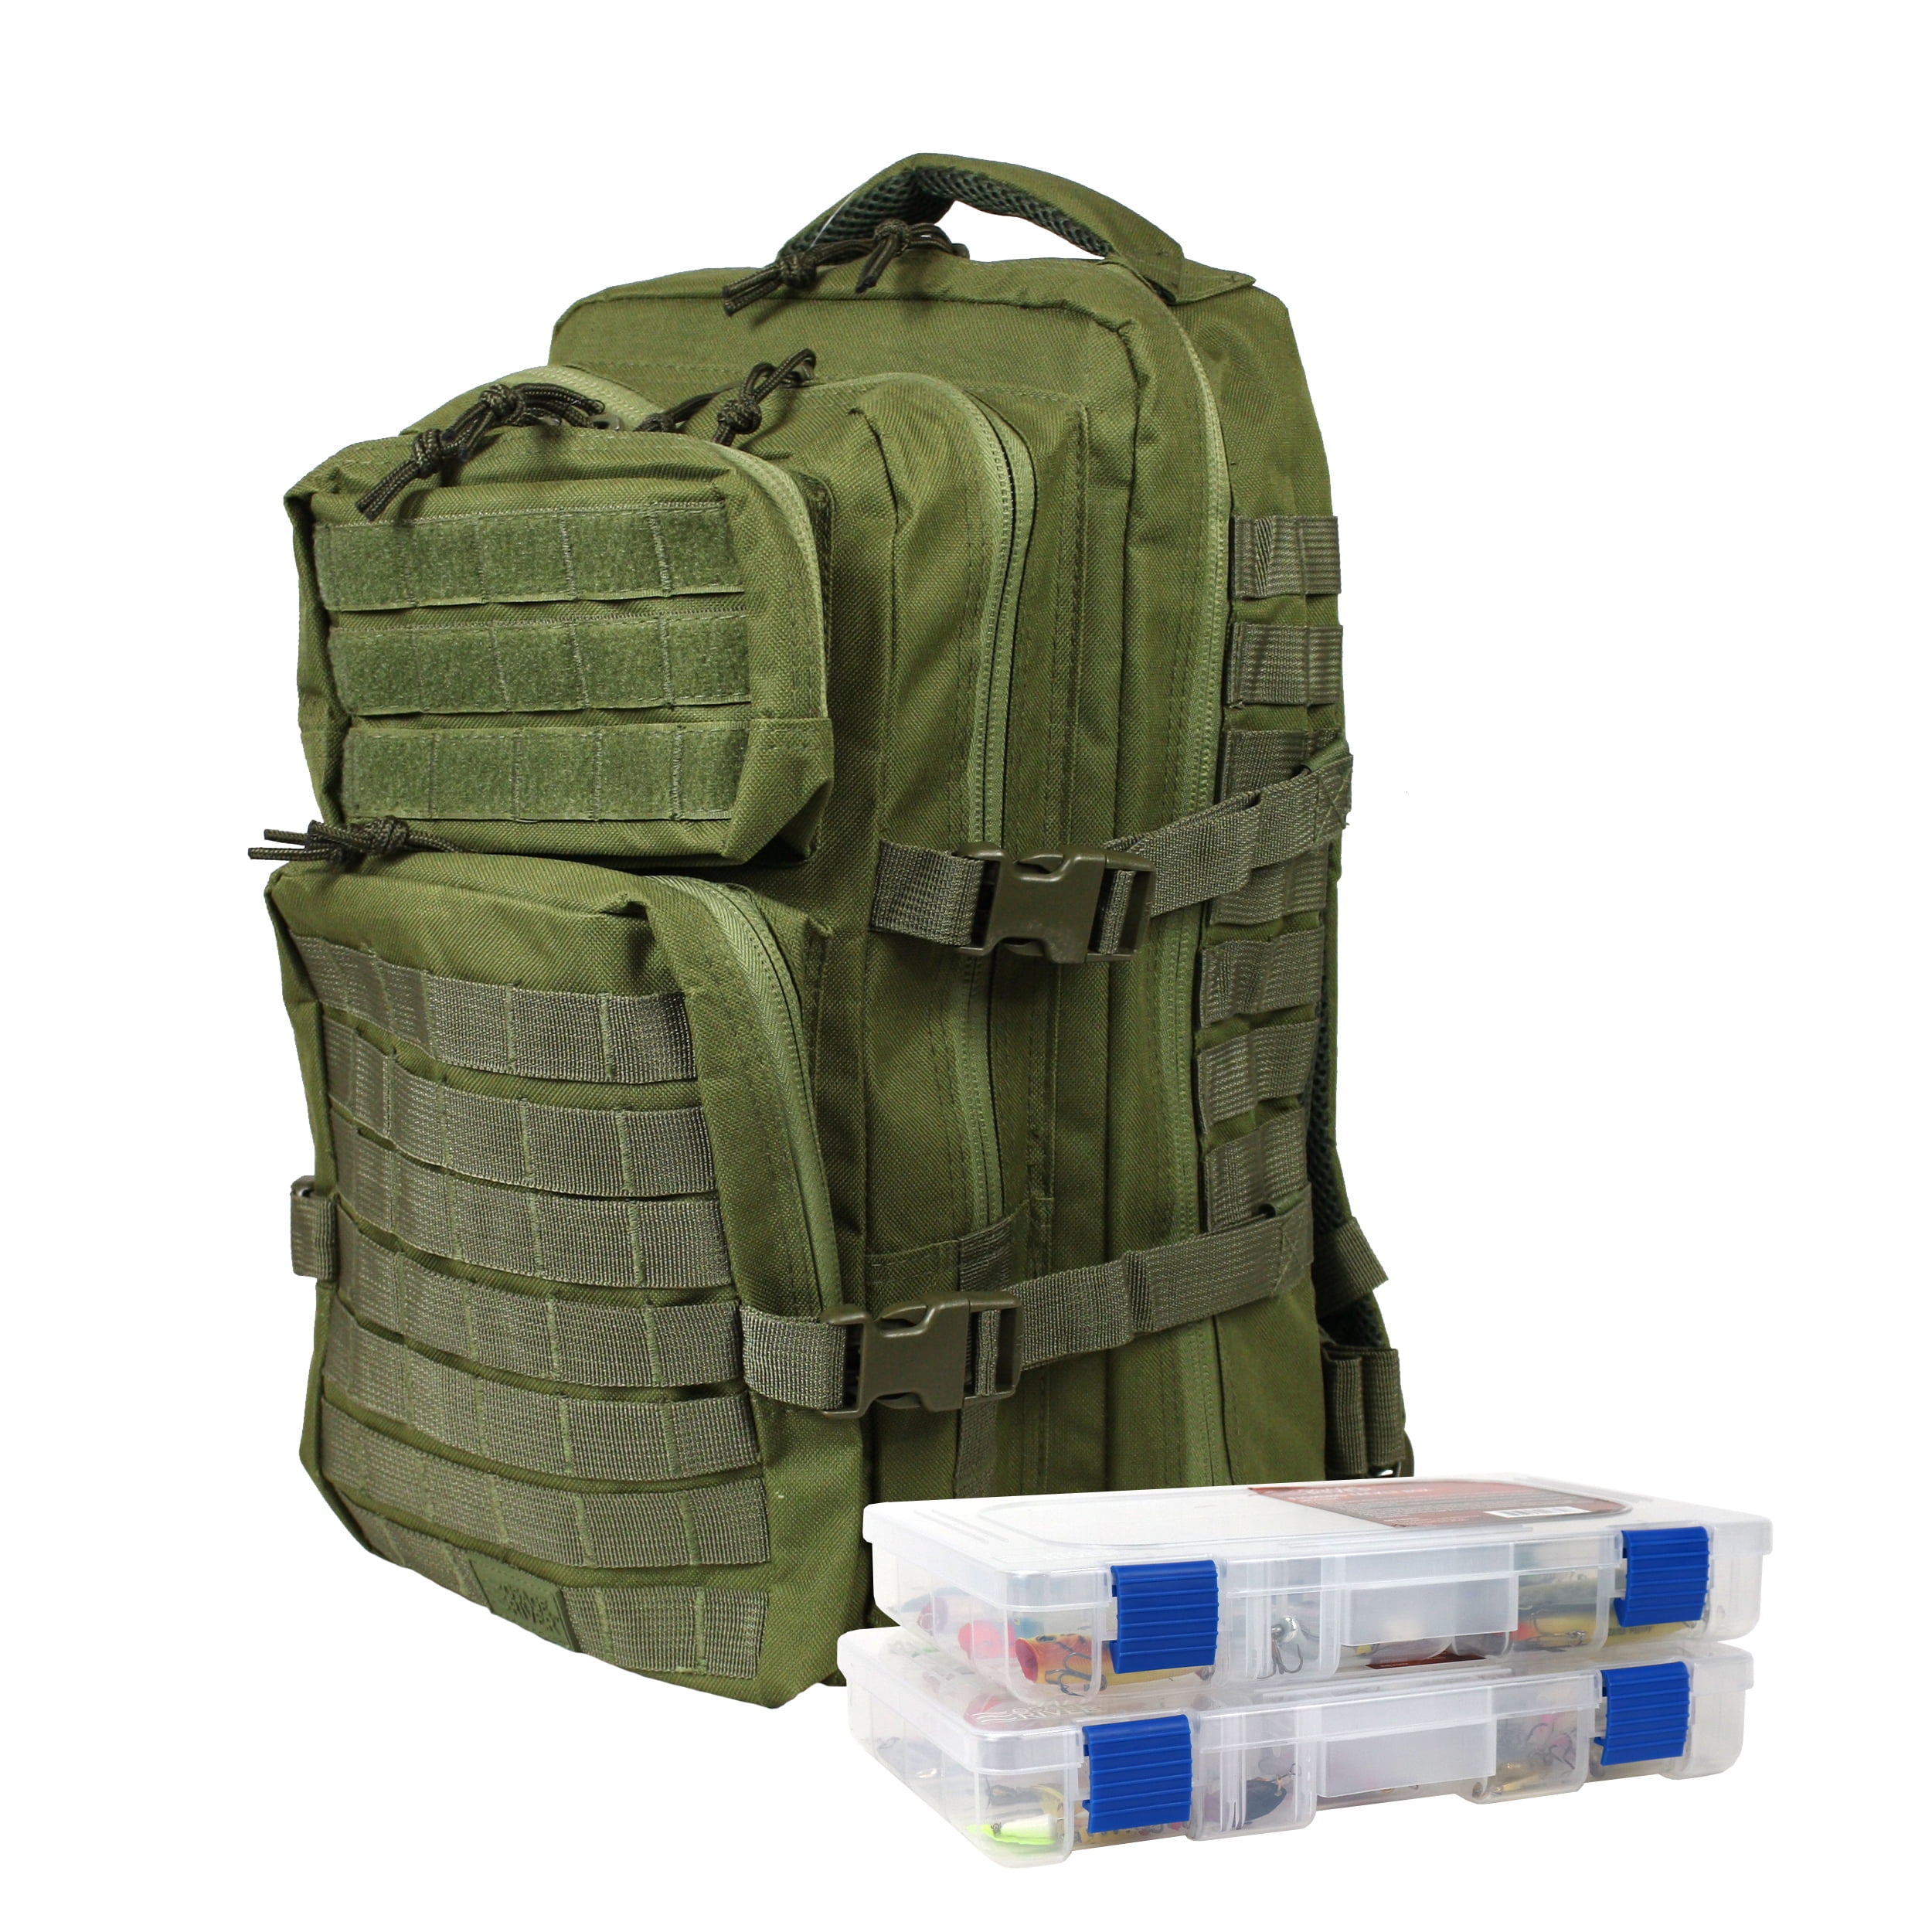 Osage River Gear Fishing Backpack, Tackle and Rod Storage - Crocodile Green  with Tackle Box